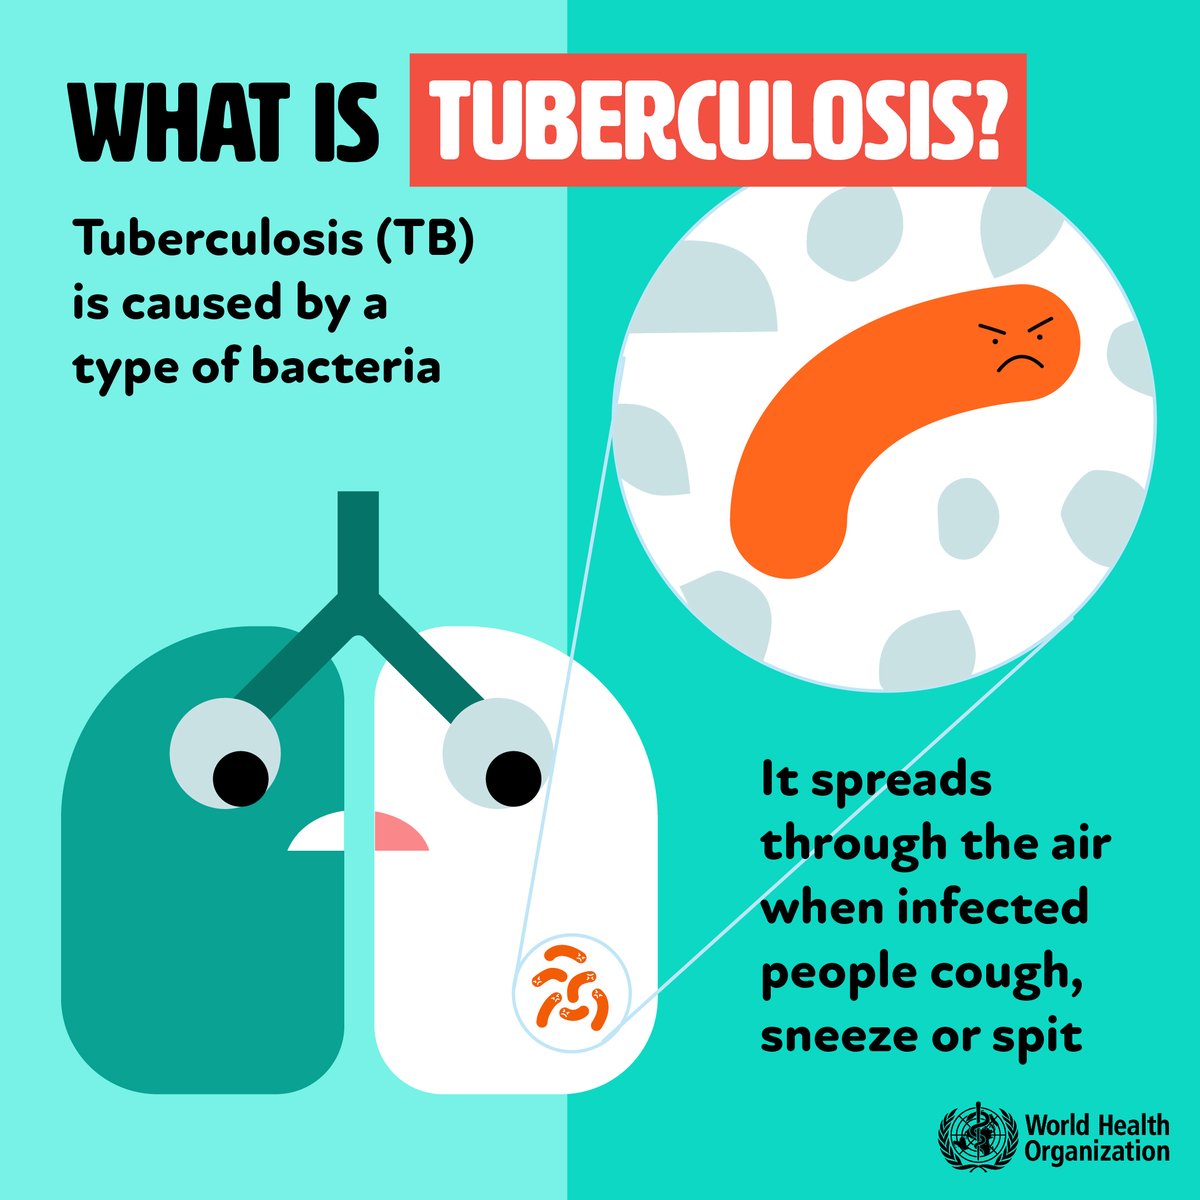 Tuberculosis is the leading cause of death among people with HIV and remains a significant threat in the African region 🌍. TB is preventable & curable. #WeCanEndTB #EndingDiseaseInAfrica